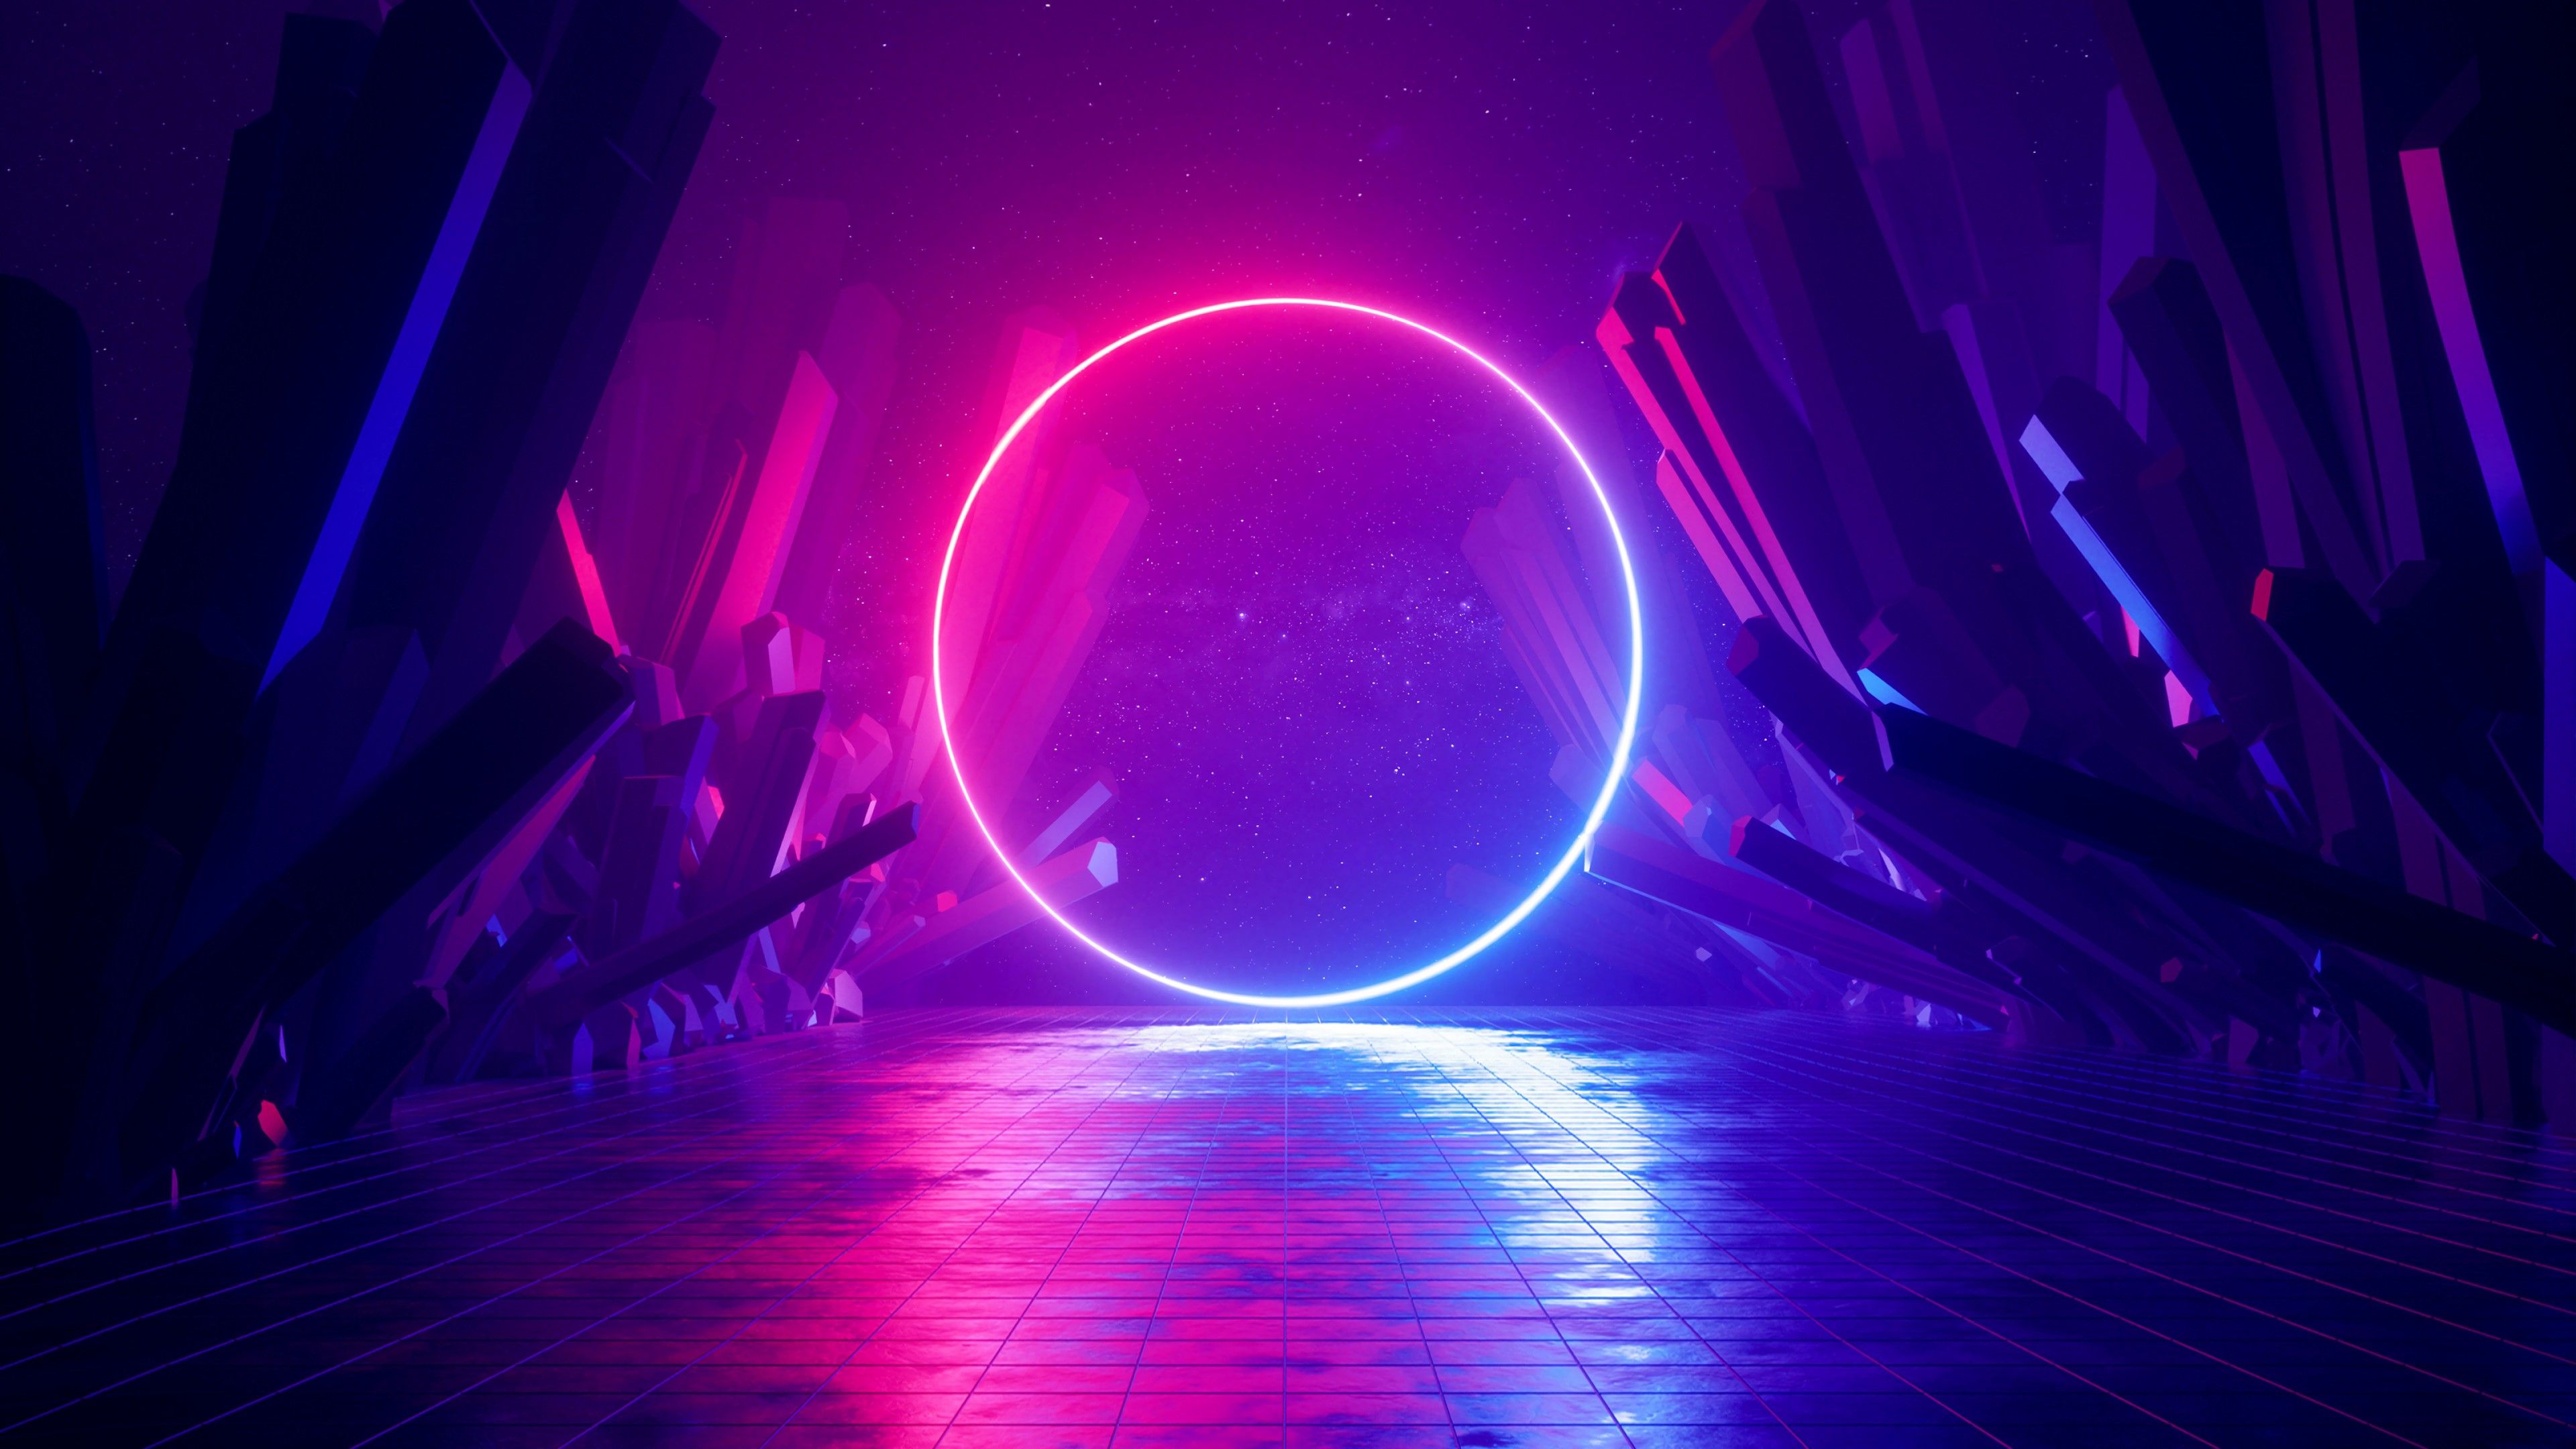 Wallpaper / digital art, illustration, abstract, neon, neon lights, lights, reflection, colorful, glowing, neon glow, purple, blue, pink, dark, shadow, rocks, circle, 3D Abstract, space, galaxy, landscape, virtual reality, science